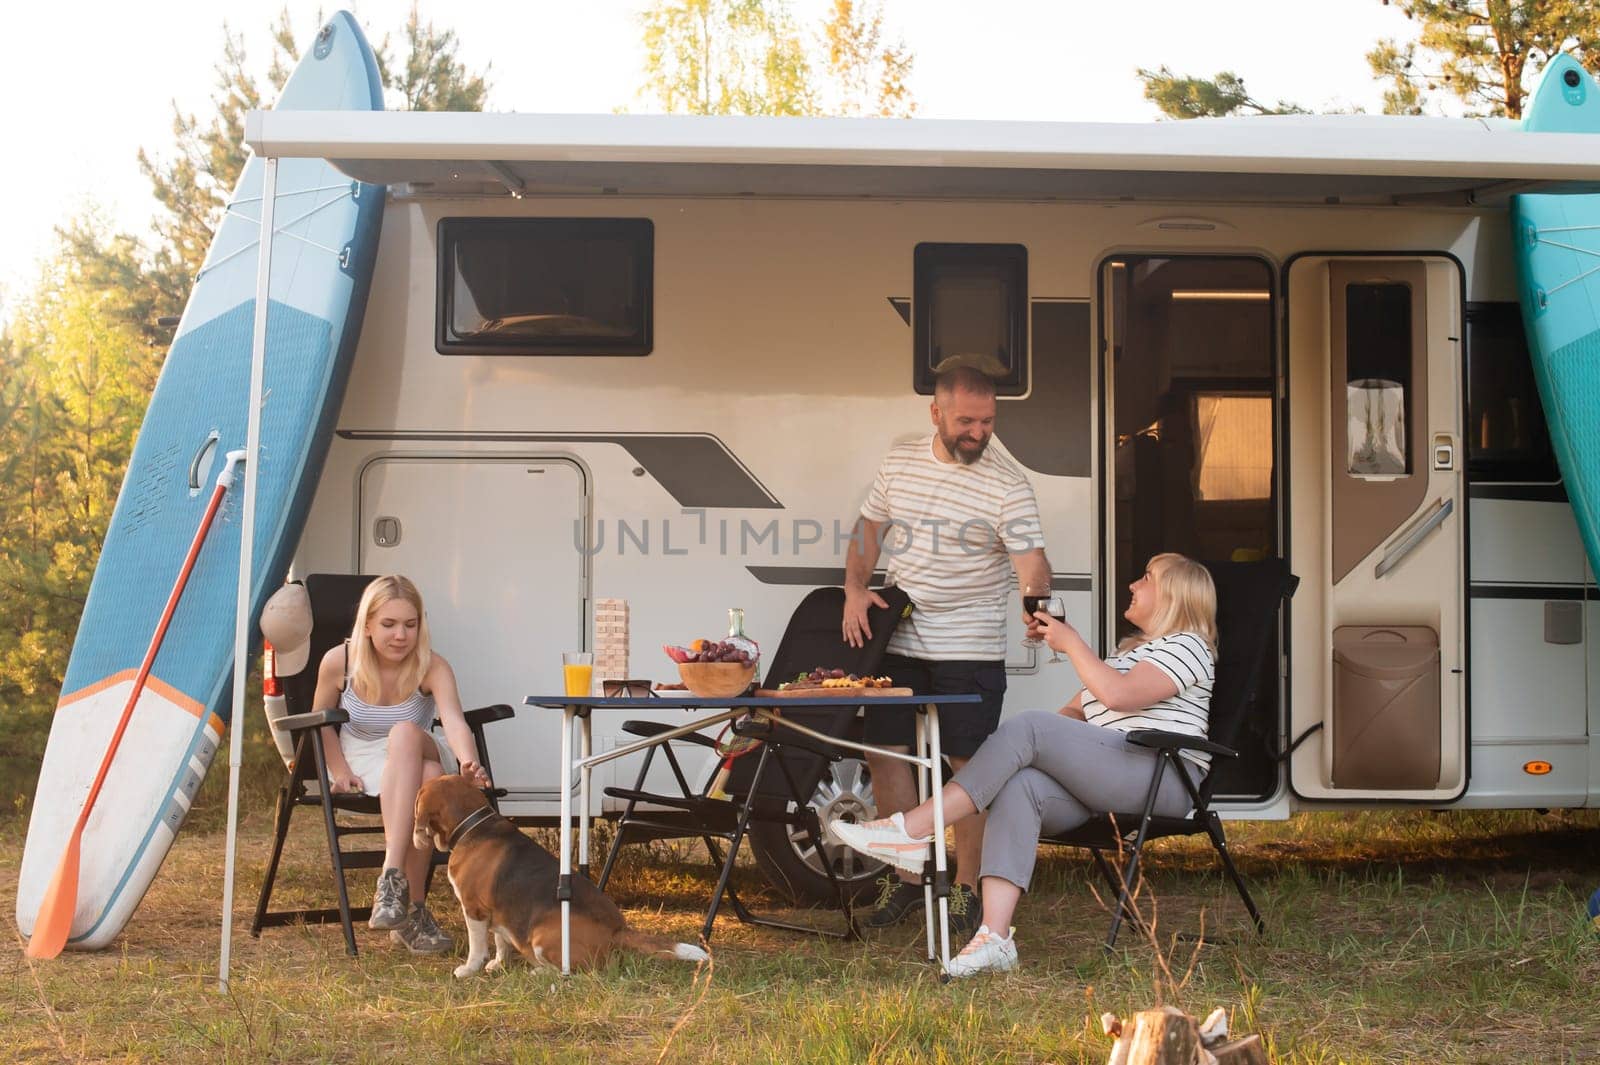 A happy family is resting nearby near their motorhome in the forest.